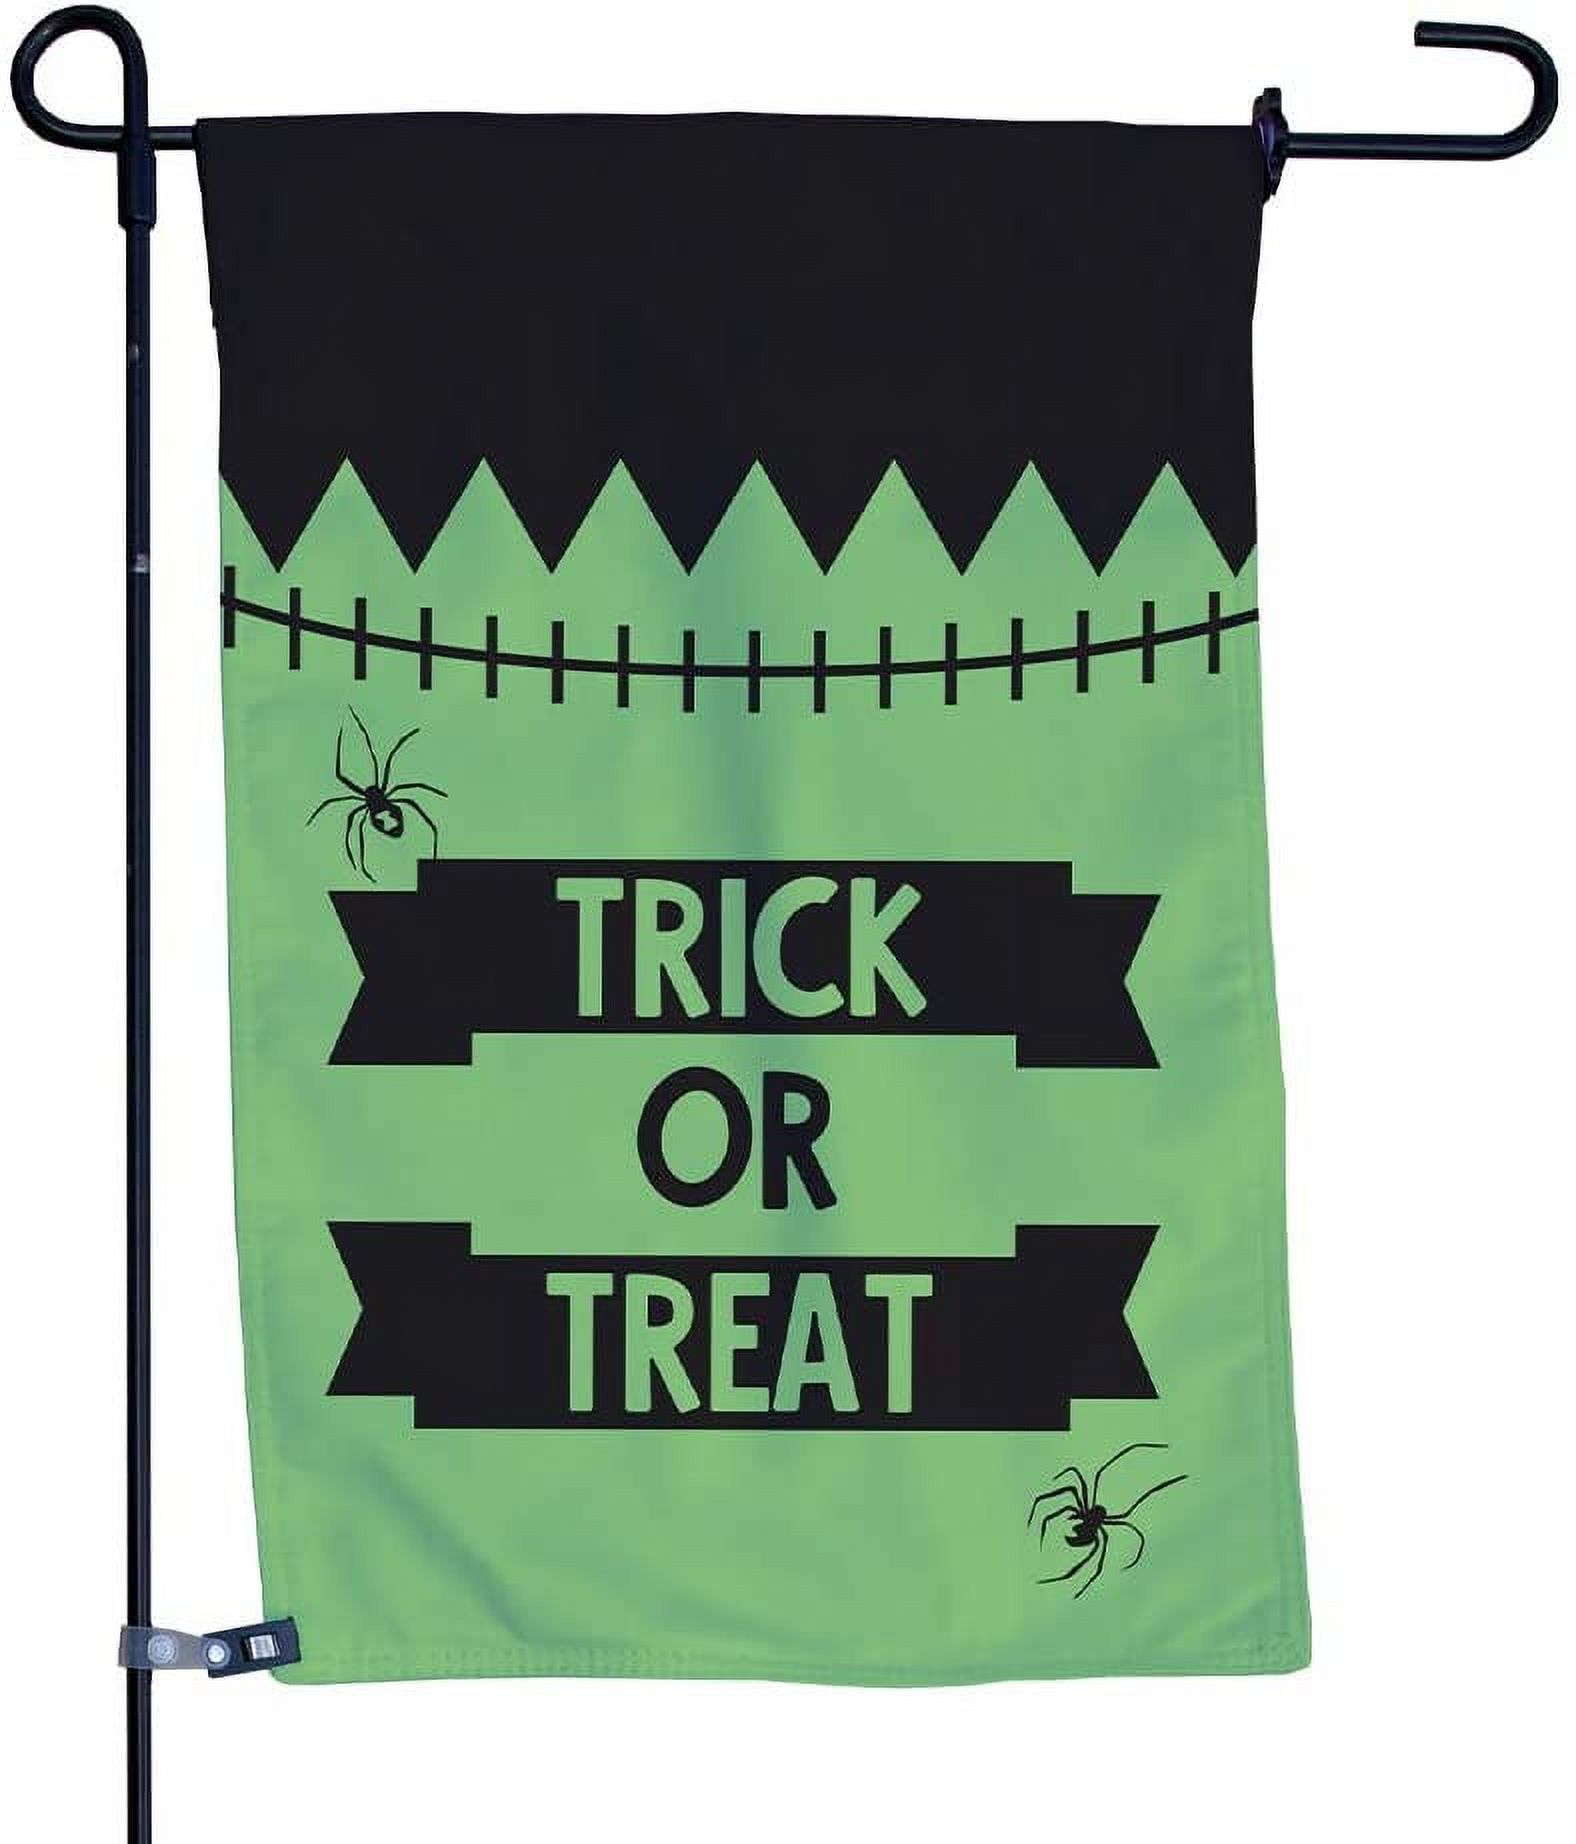 Seasonal Trick or Treat Garden Flag, Double-Sided Outdoor Garden Flag and Flagpole, Decorative Flag for Homes, 12 x 18 Inch Flag with 36 Inch Flagpole - image 1 of 5